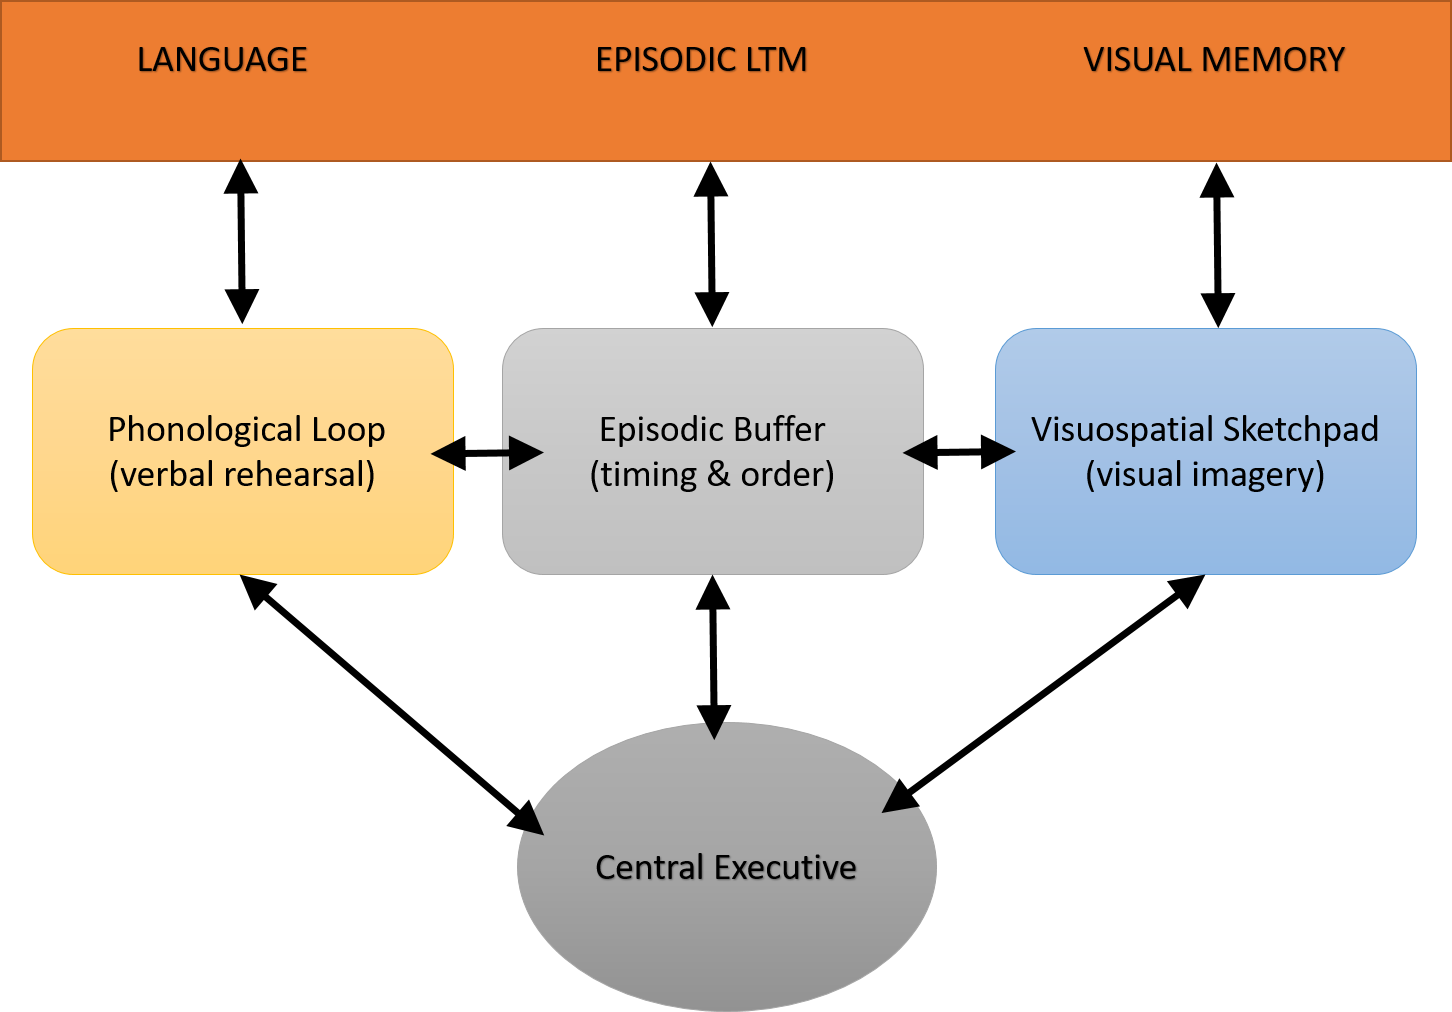 Flow diagram. The top rectangle is labeled from left to right as LANGUAGE, EPISODIC LTM, and then VISUAL MEMORY. The boxes under those labels (from left to right) are Phonological Loop (verbal rehearsal), Episodic Buffer (timing and order) and VIsuospatial Sketchpad (visual imagery). The bottom circle says Central Executive. There are two way arrows going between Central Executive and middle row of boxes, between the boxes in the middle row, and between the boxes in the middle row and the ones directly above them in the top row.